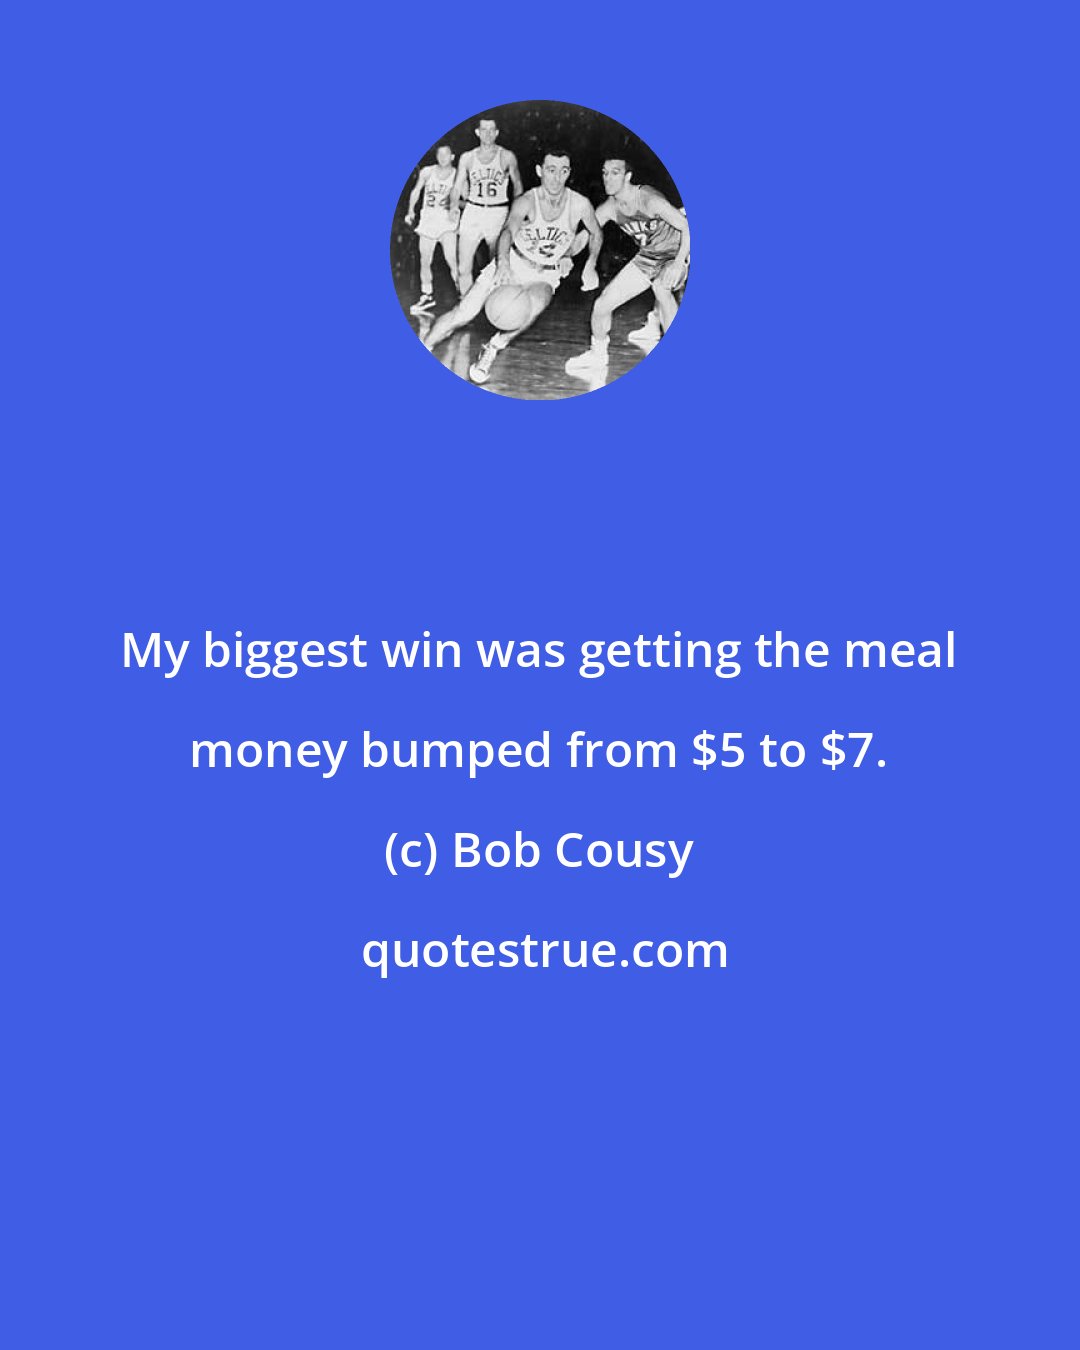 Bob Cousy: My biggest win was getting the meal money bumped from $5 to $7.